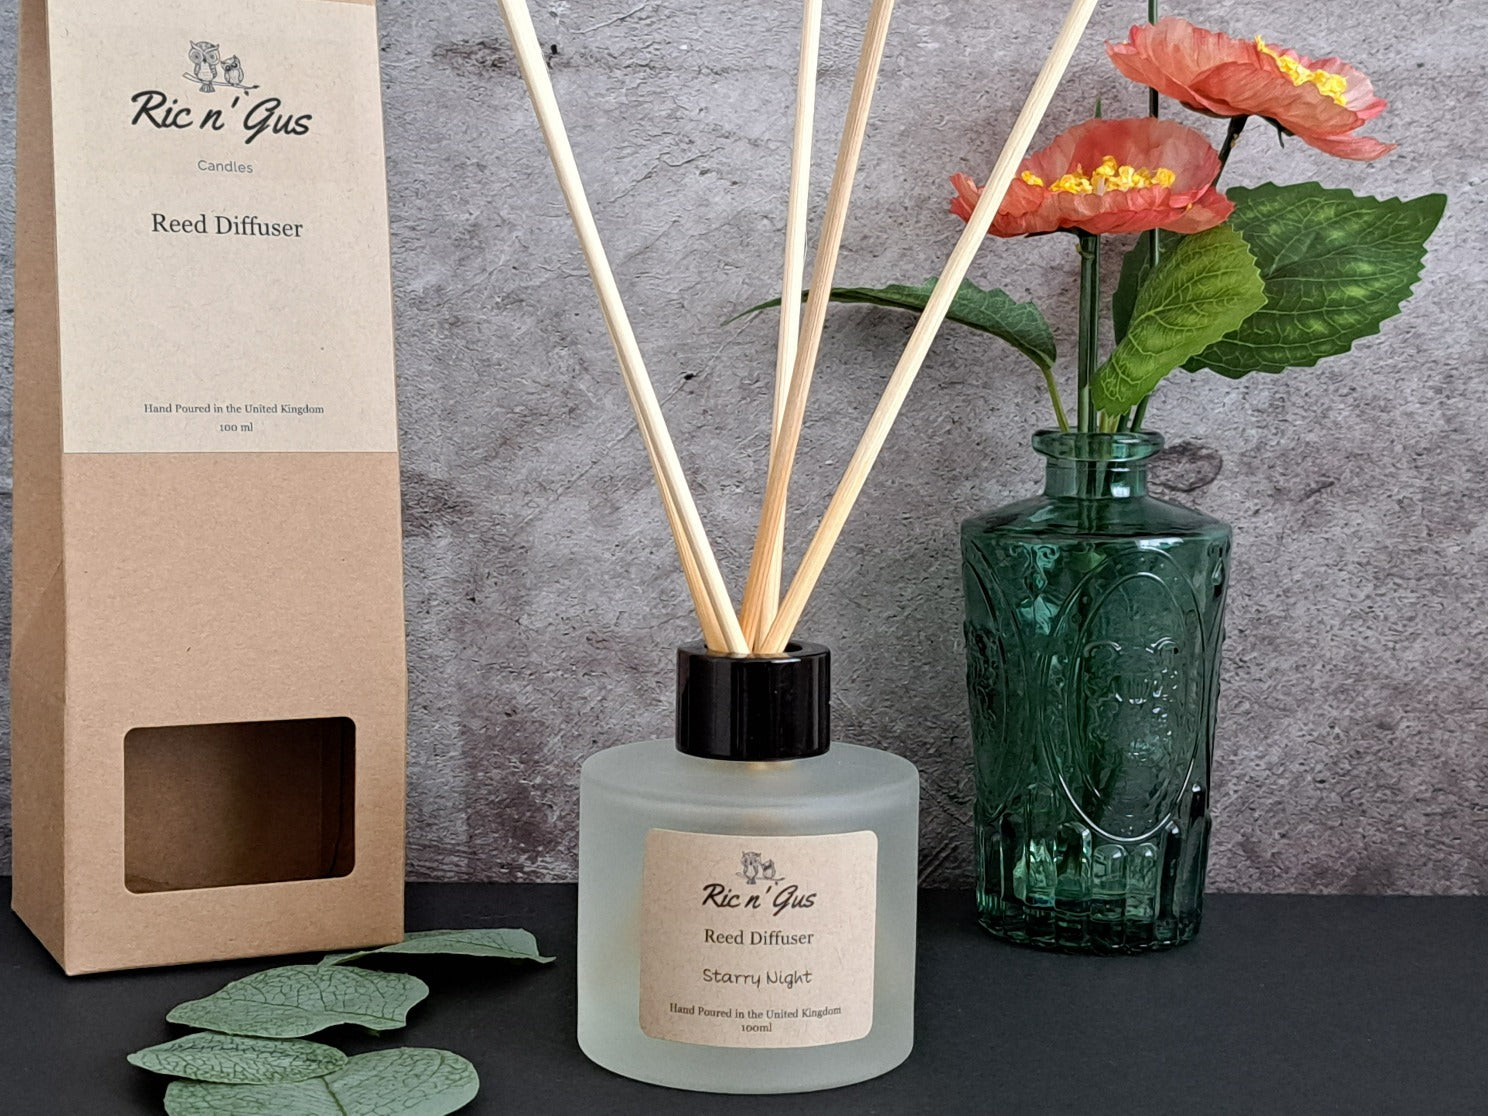 Starry Night Reed Diffuser Ric n'Gus Candles